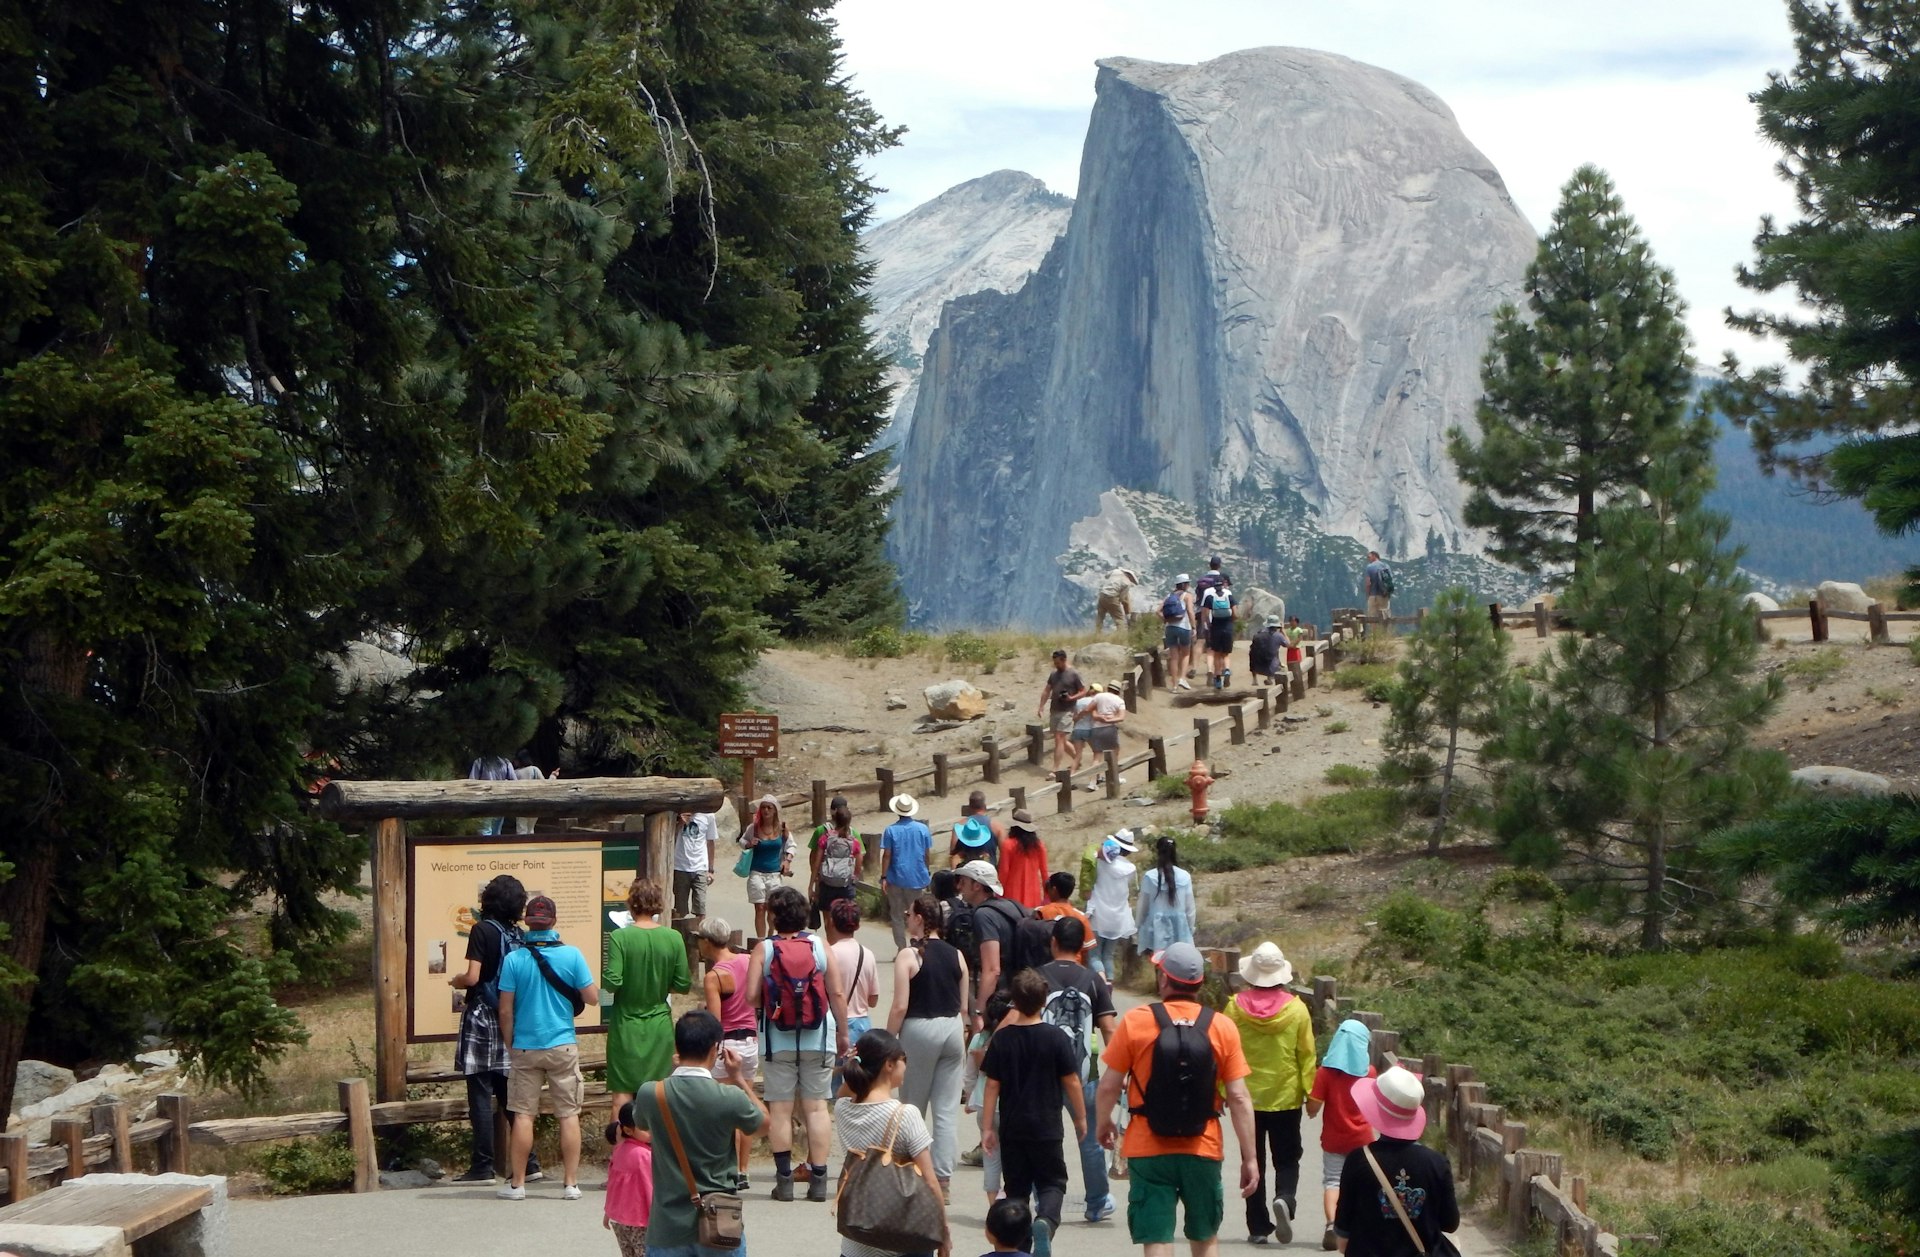 Tourists walk to Glacier Point with a background view of Half Dome at Yosemite National Park